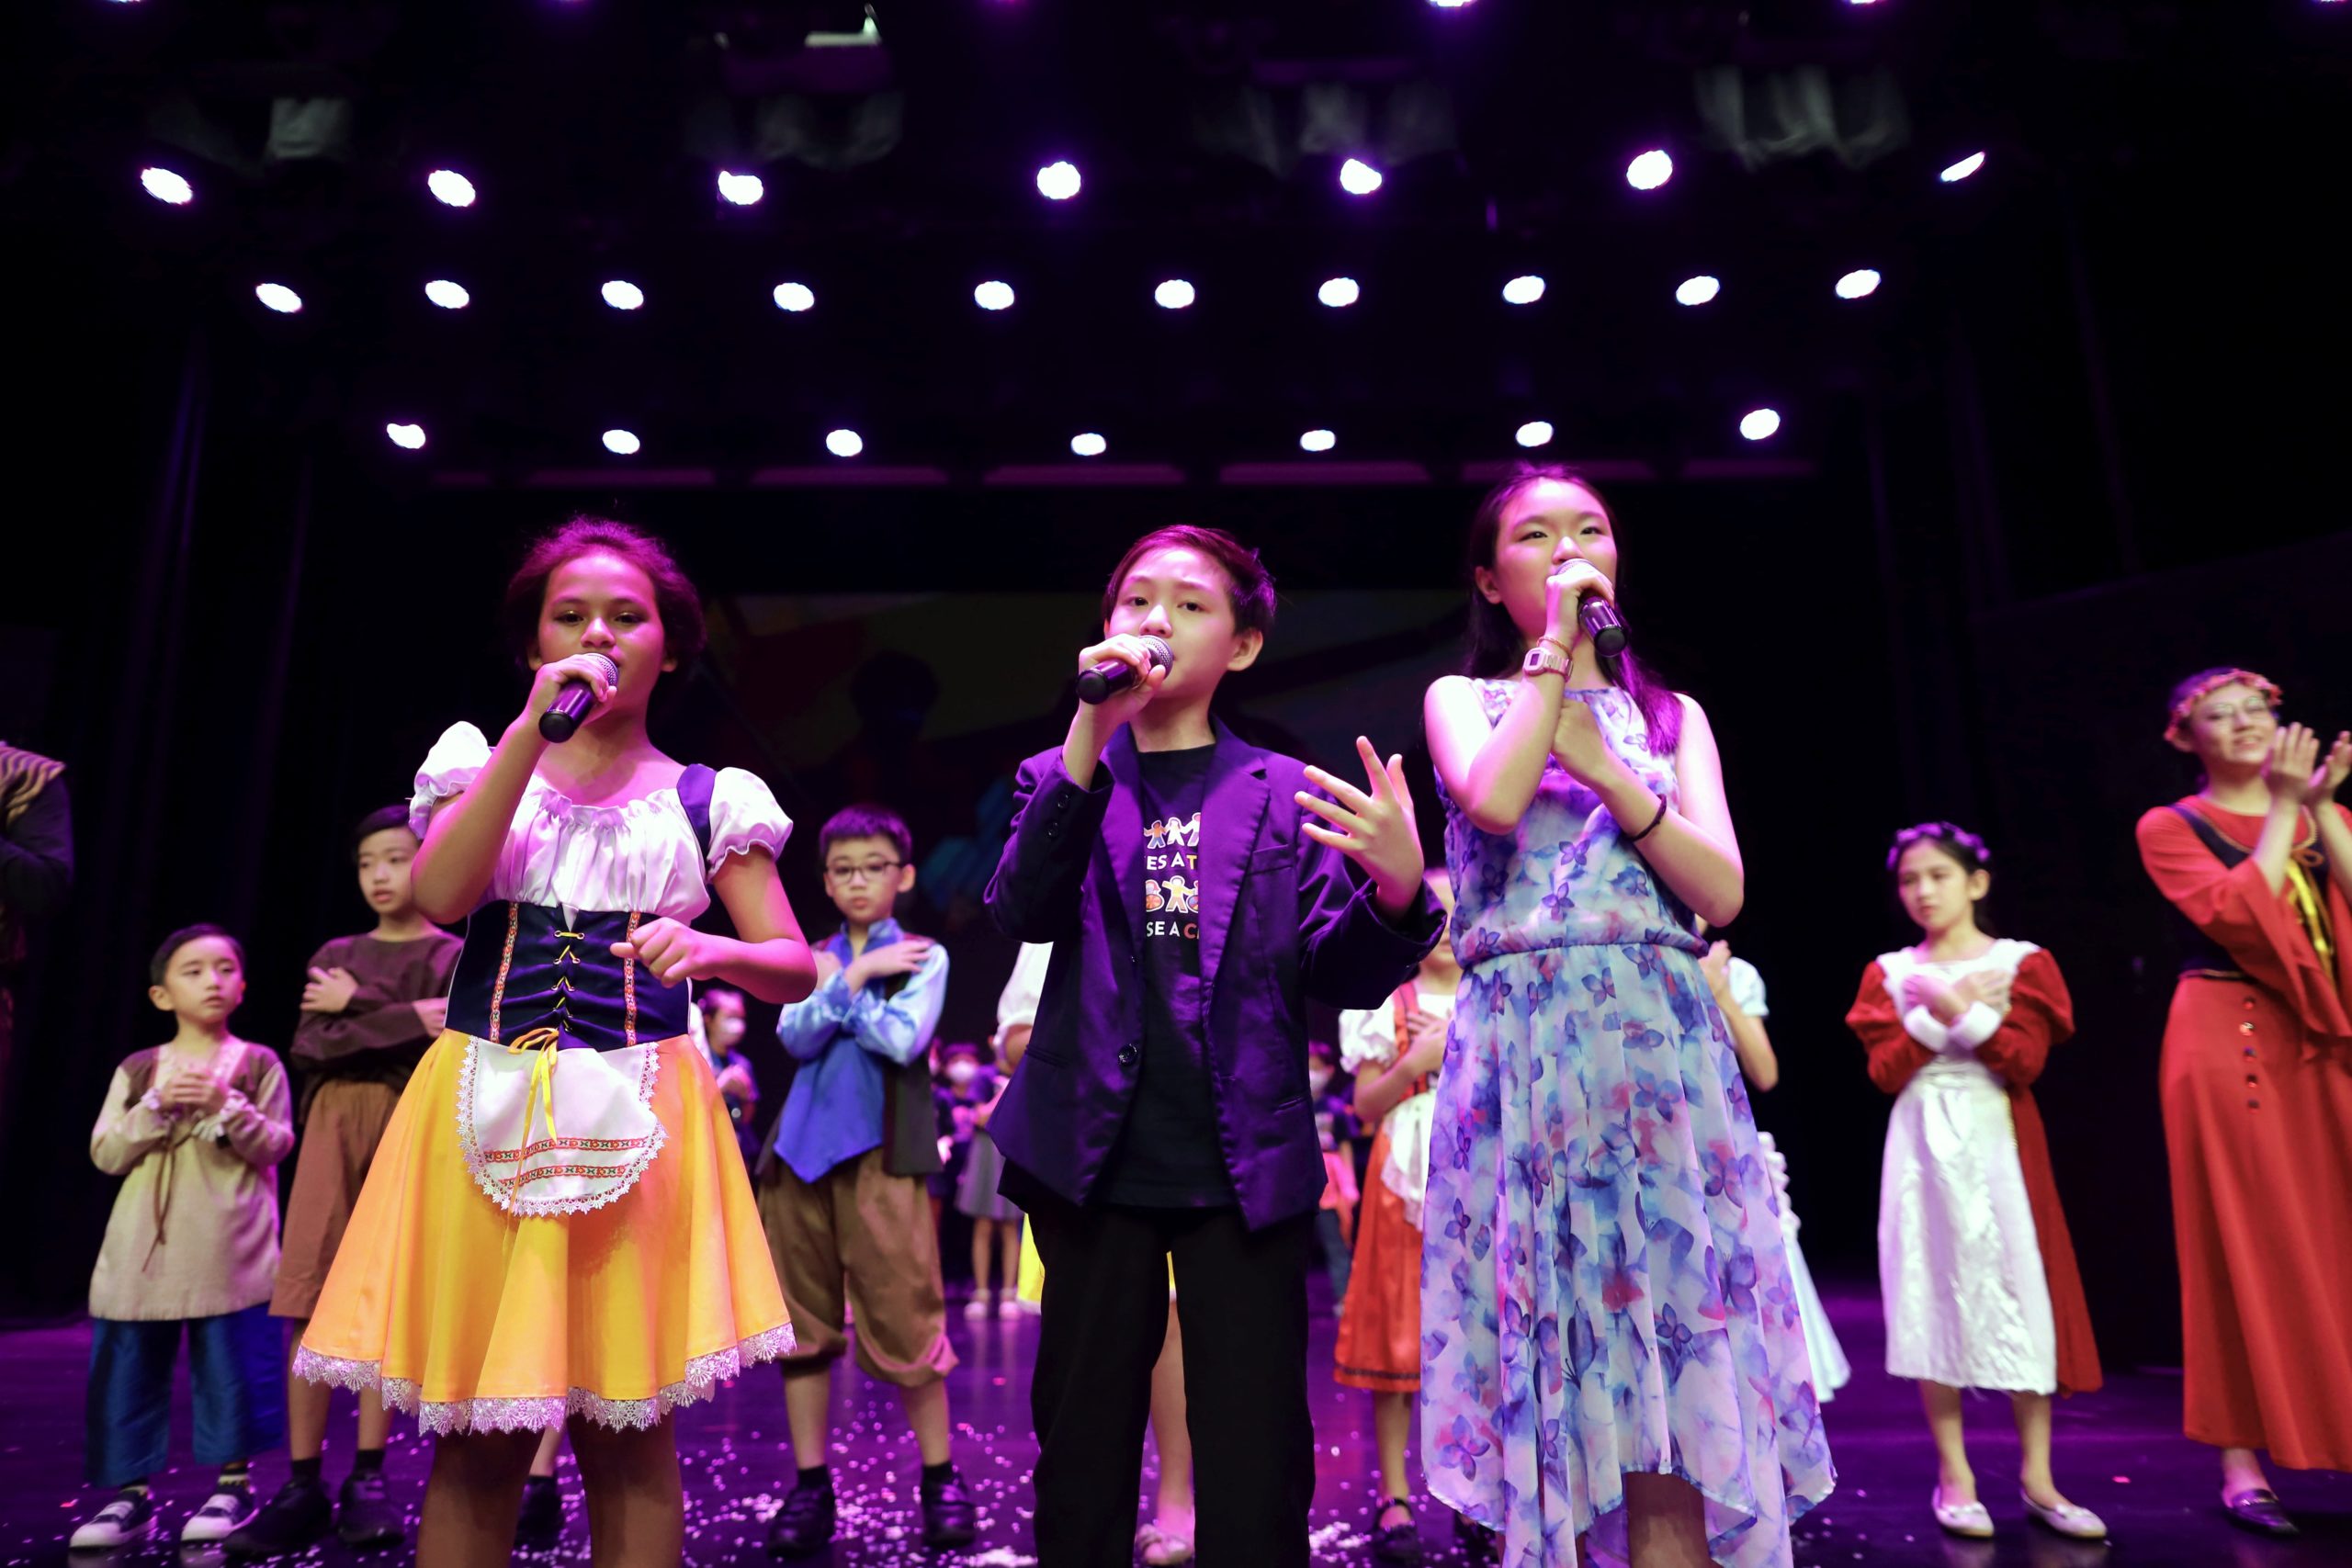 Hankidz celebrates its 10th anniversary of cultivating leadership skills for children in asia | weirdkaya